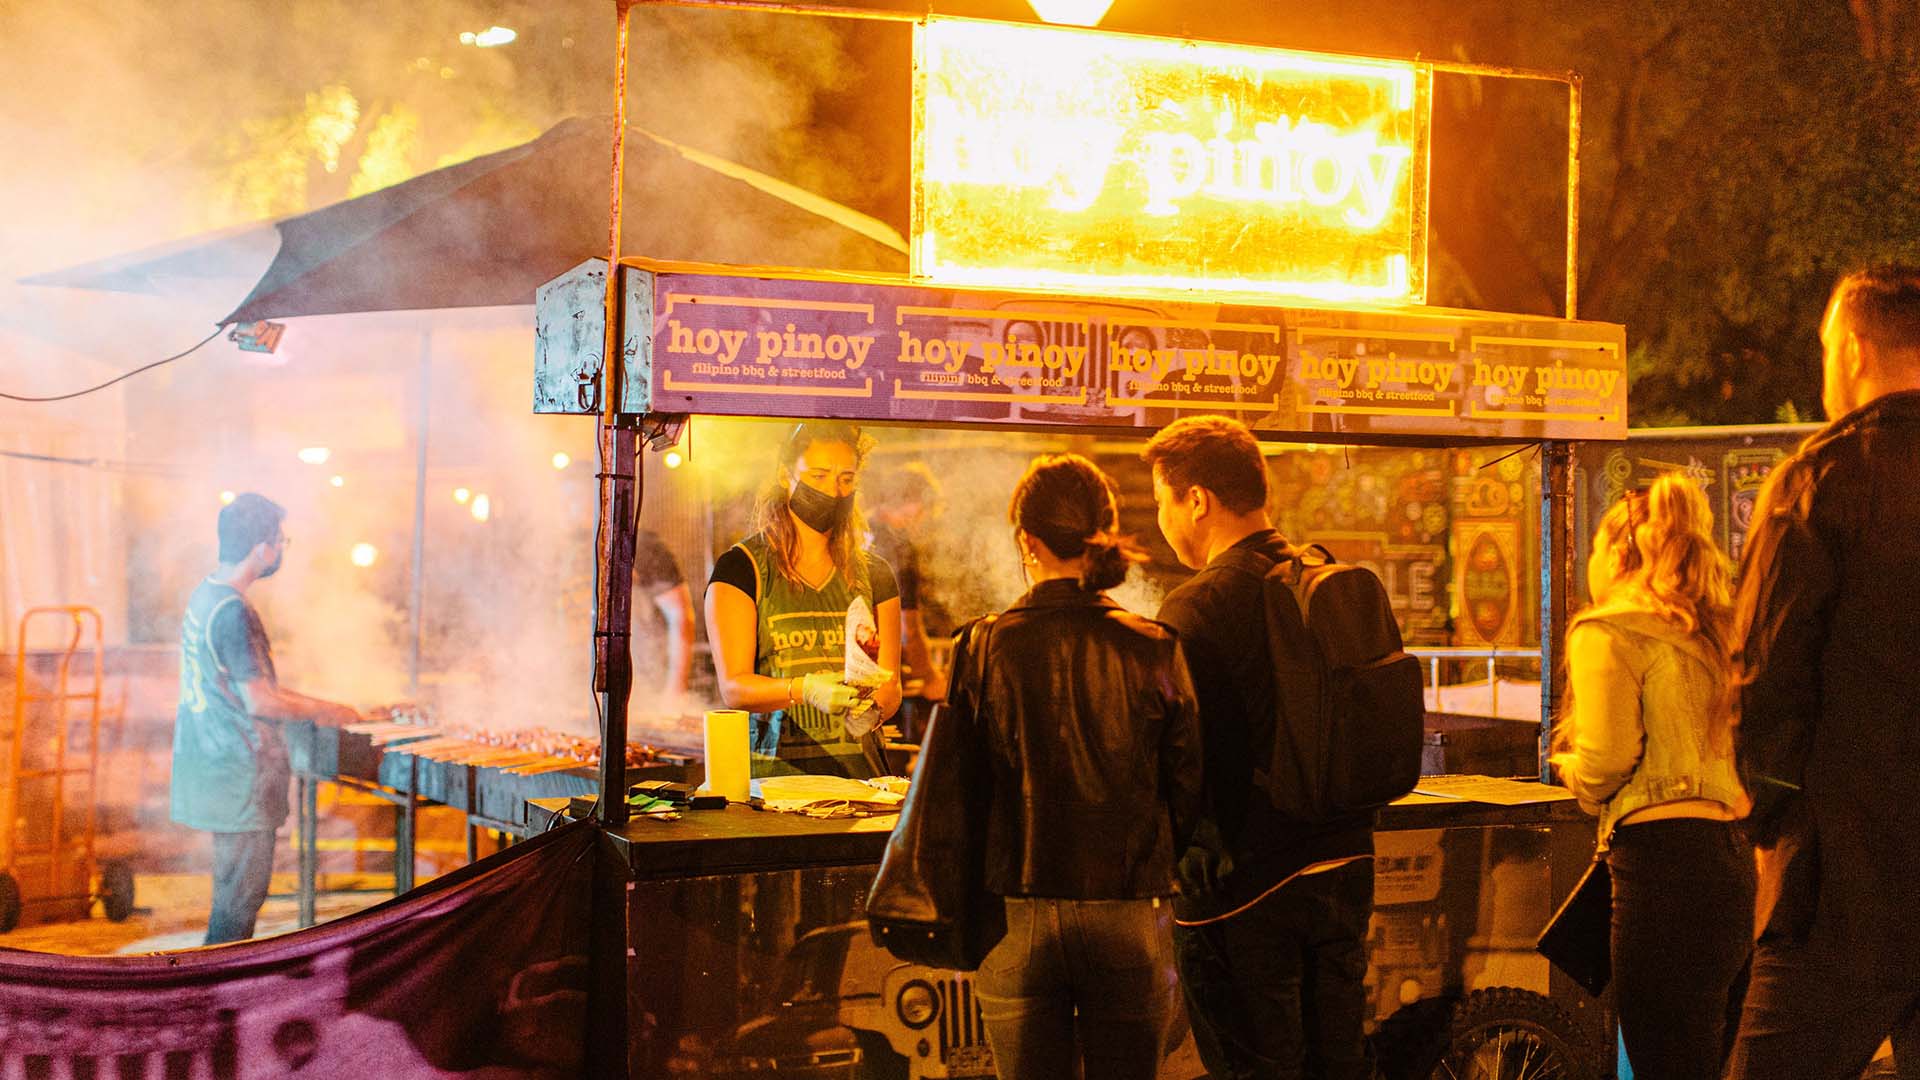 Sydney's Night Noodle Markets Have Been Cancelled for the Second Night in a Row